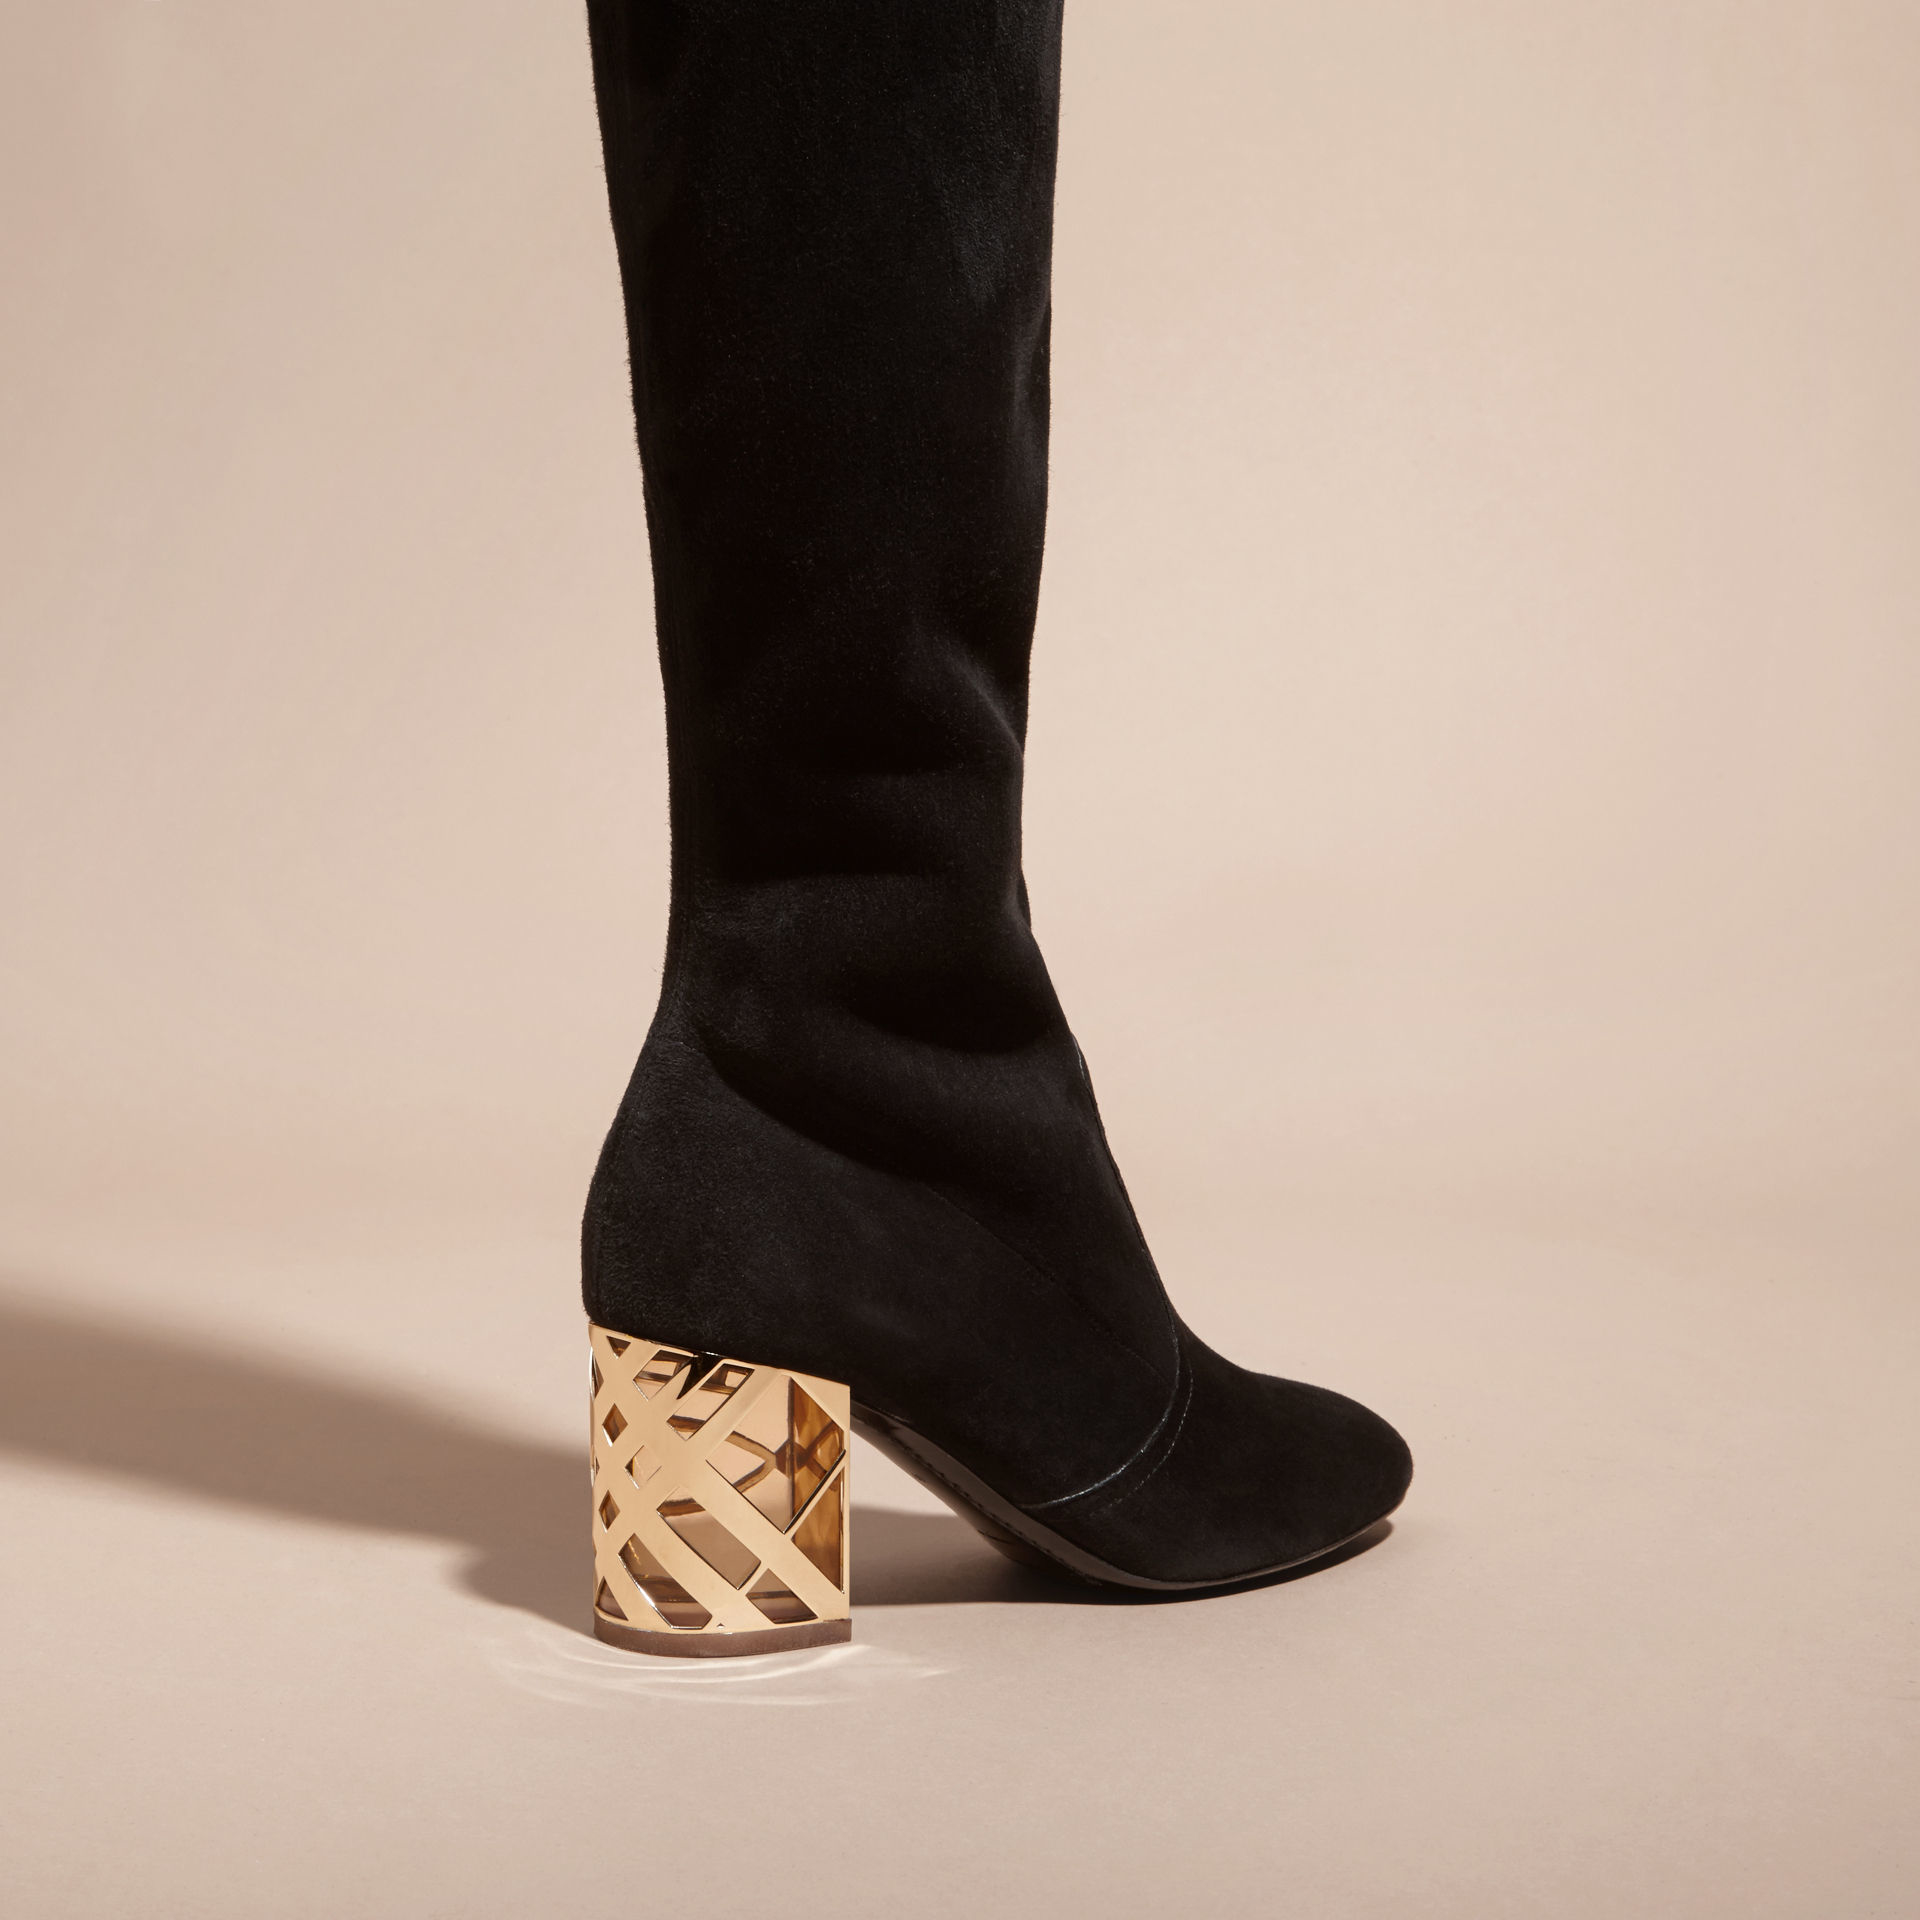 Burberry Check Heel Suede Over-the-knee Boots in Black - Lyst